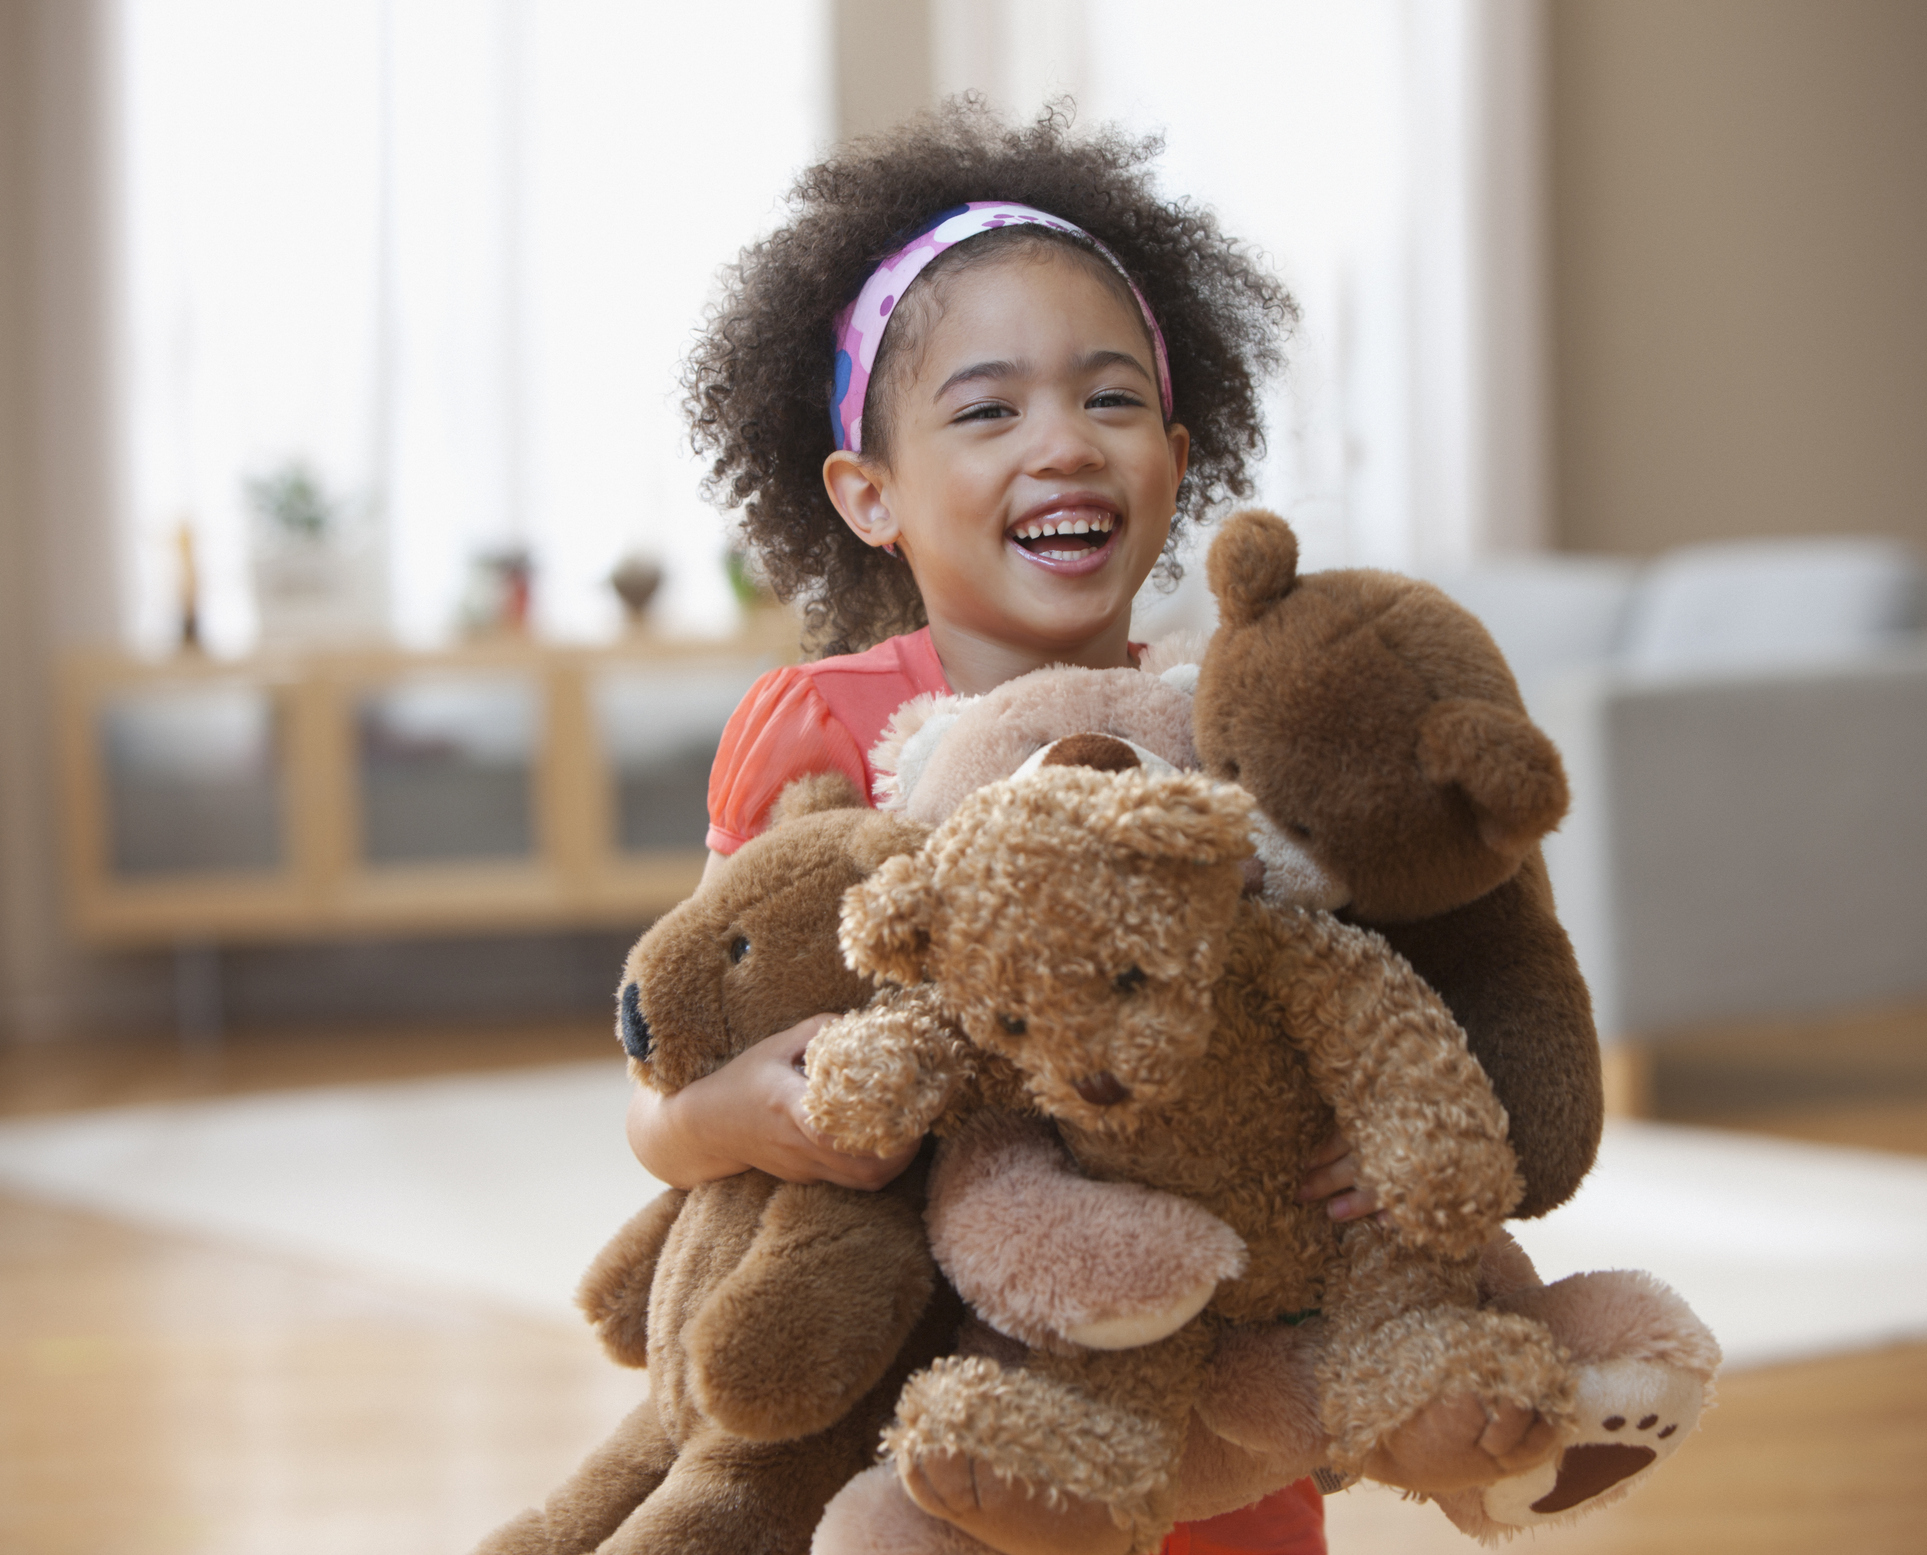 Grab your kids favorite plushies and get ready for a night of family fun